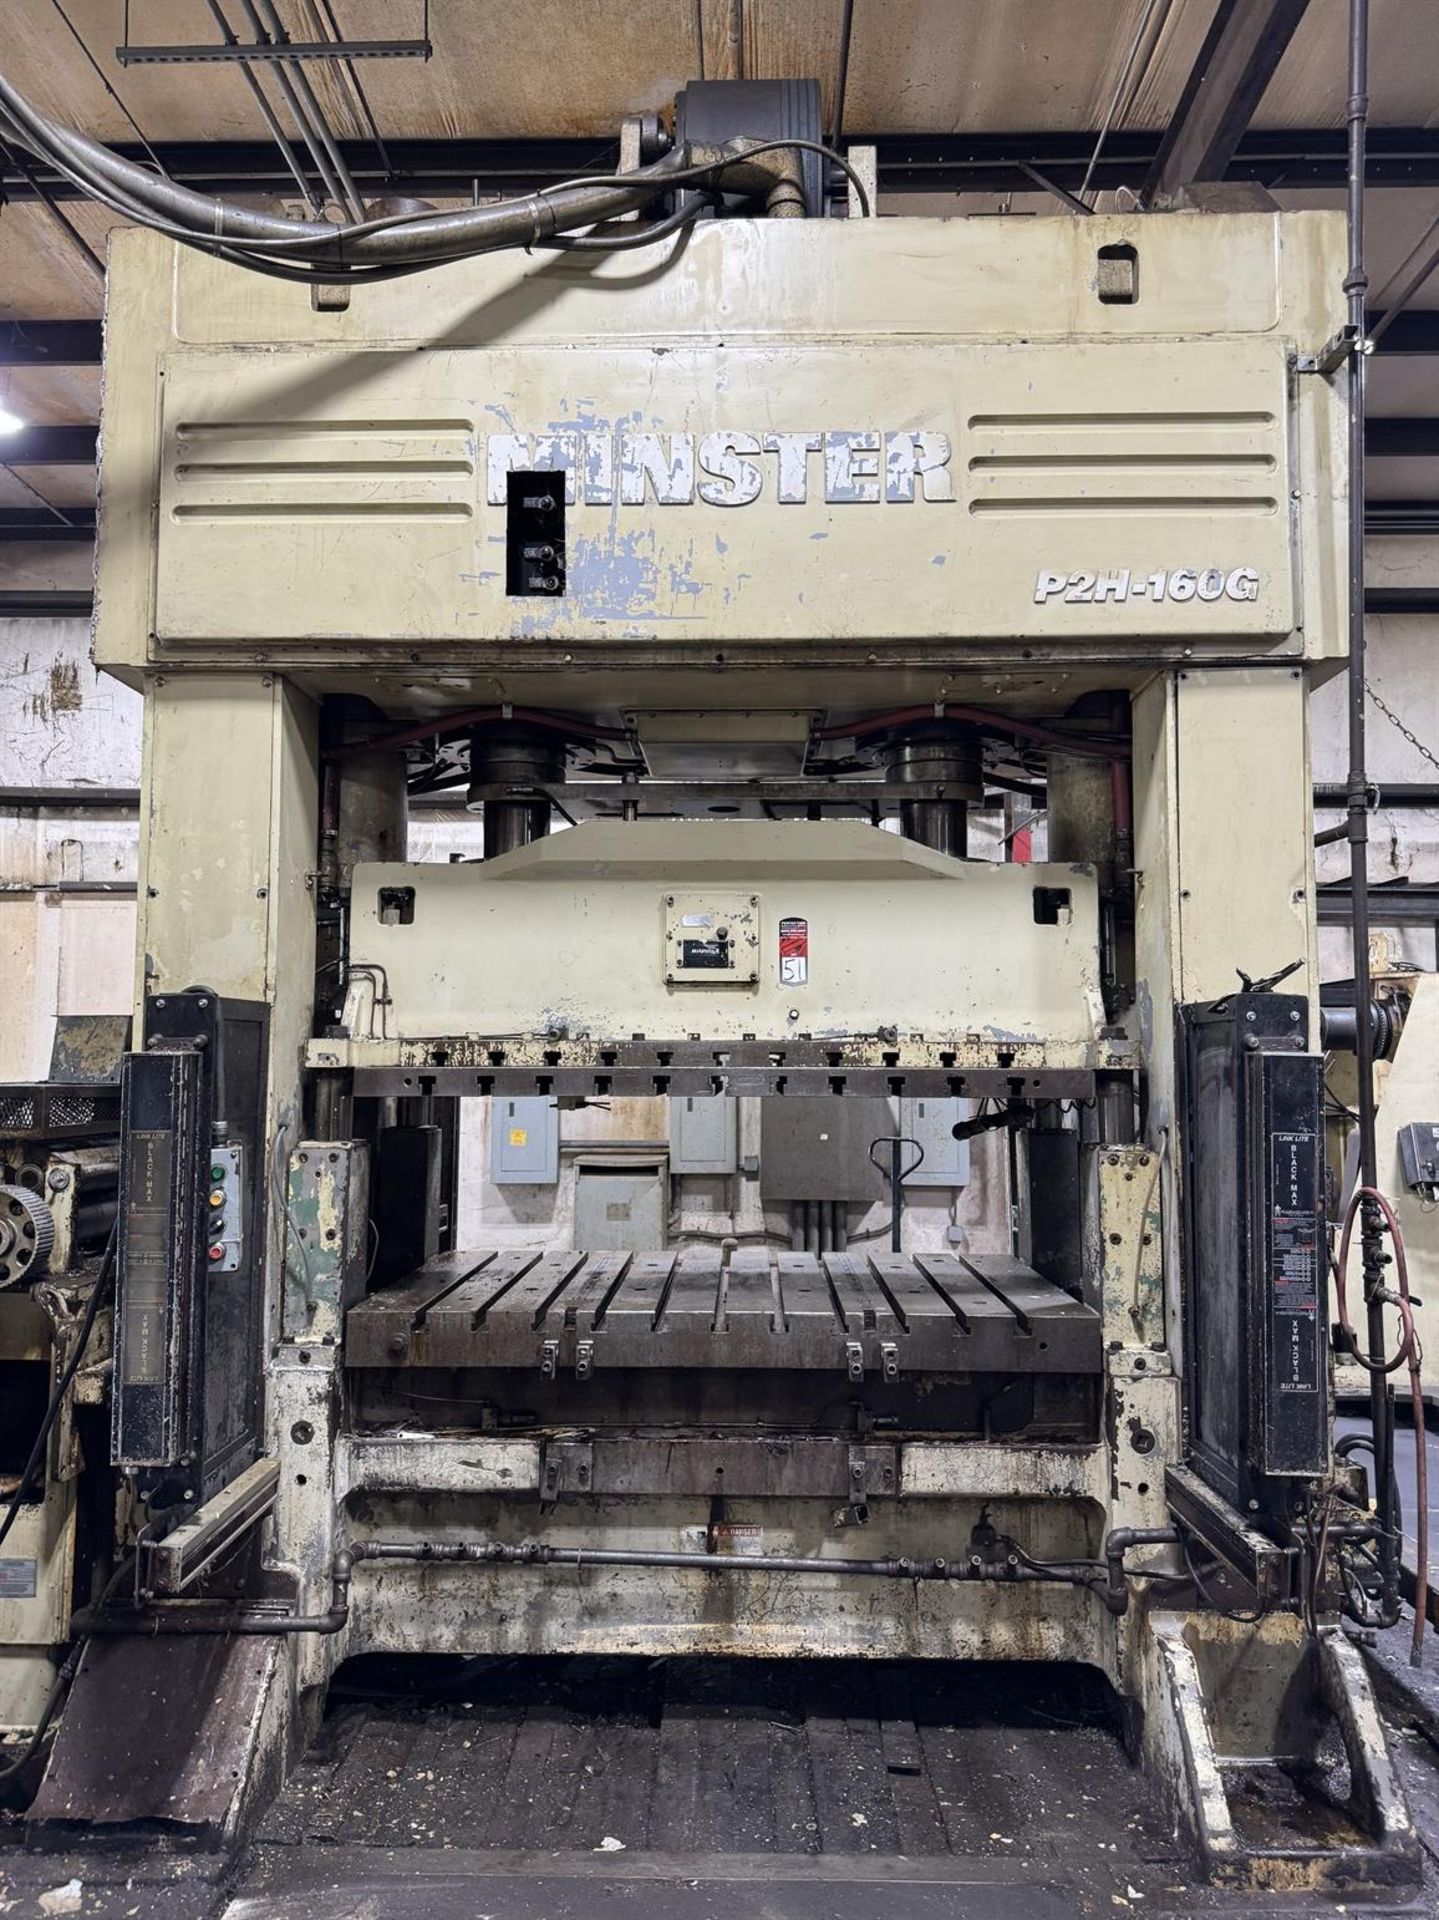 1999 MINSTER P2H-160-75x34-S 160 Ton Straight Side Press, s/n 29672, w/ 74.8”x 33.5” Bed, 20.1” w/ - Image 2 of 14